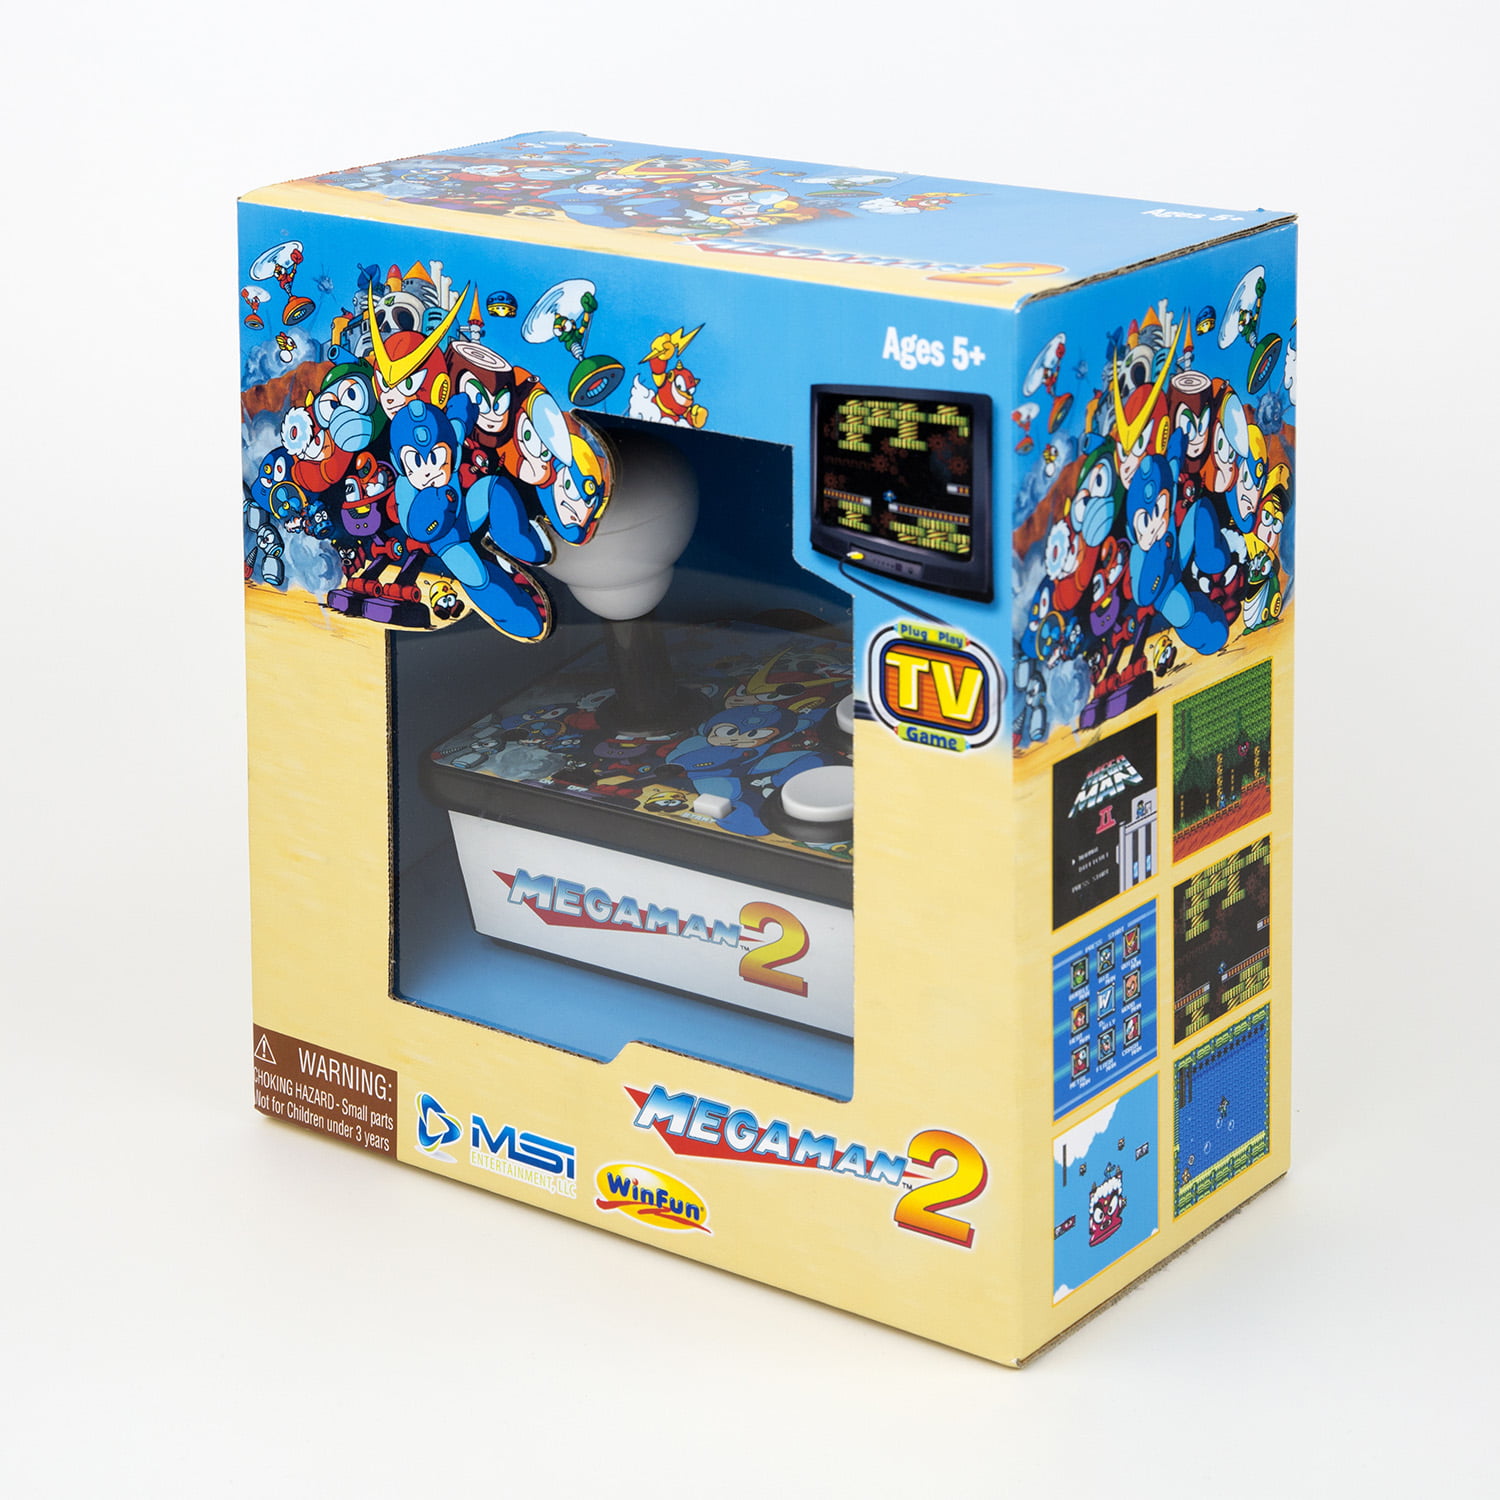 Mega Man 2 Plug and Play TV Arcade Video Game System 30 Year Anniversary for sale online 